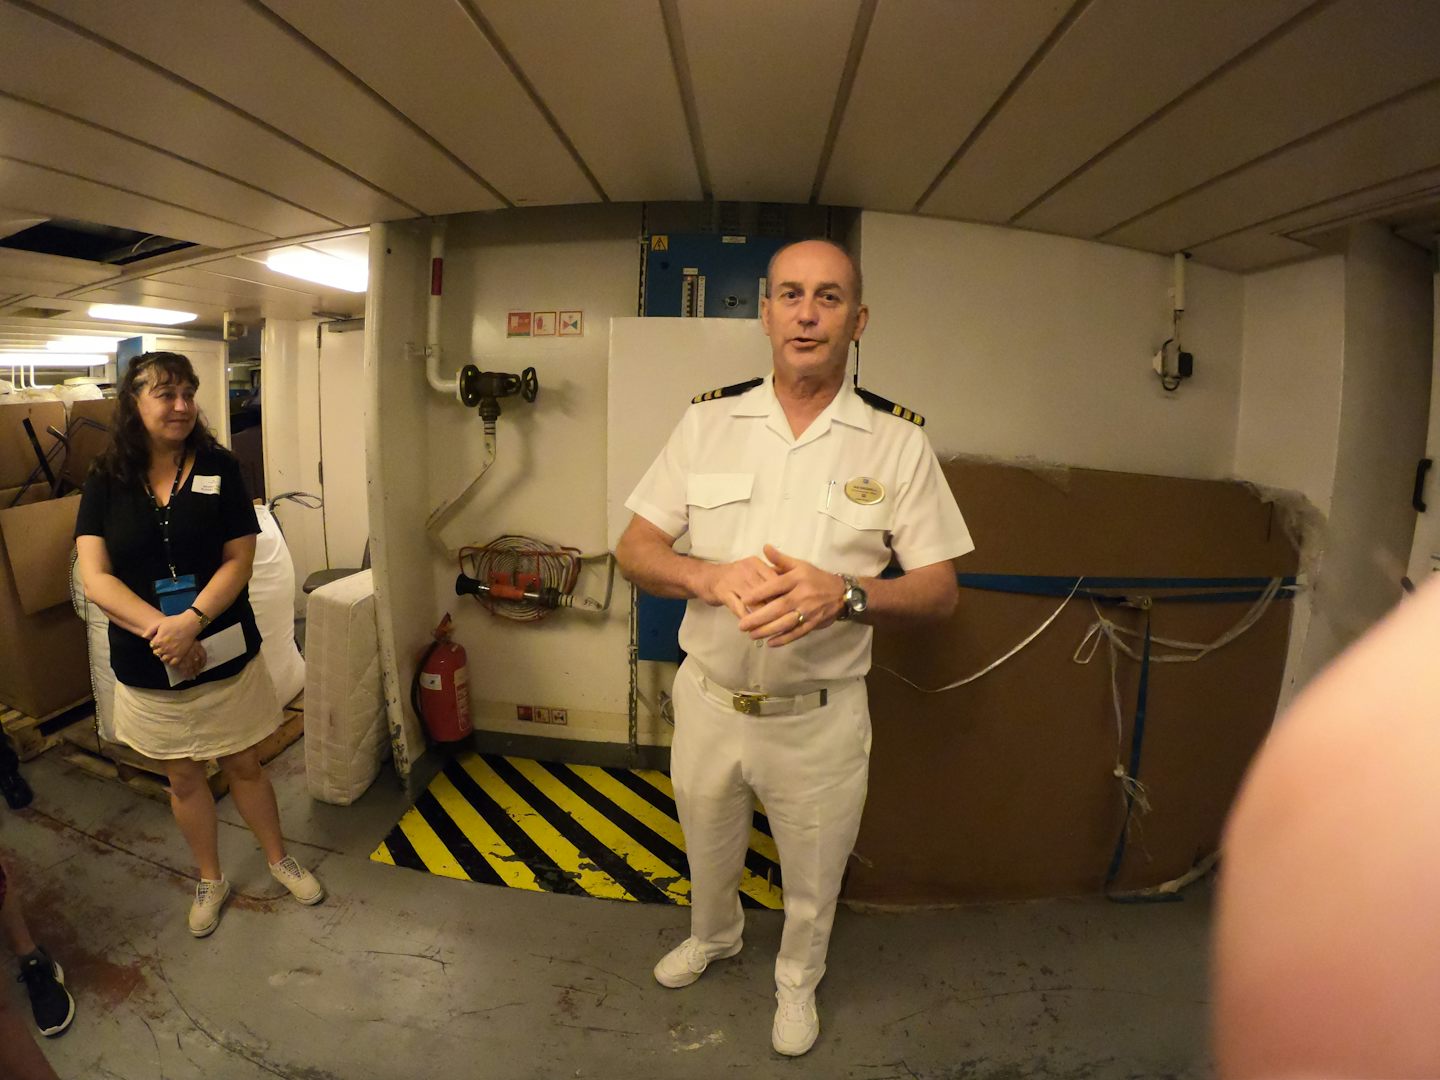 behind the scenes tour of the ship